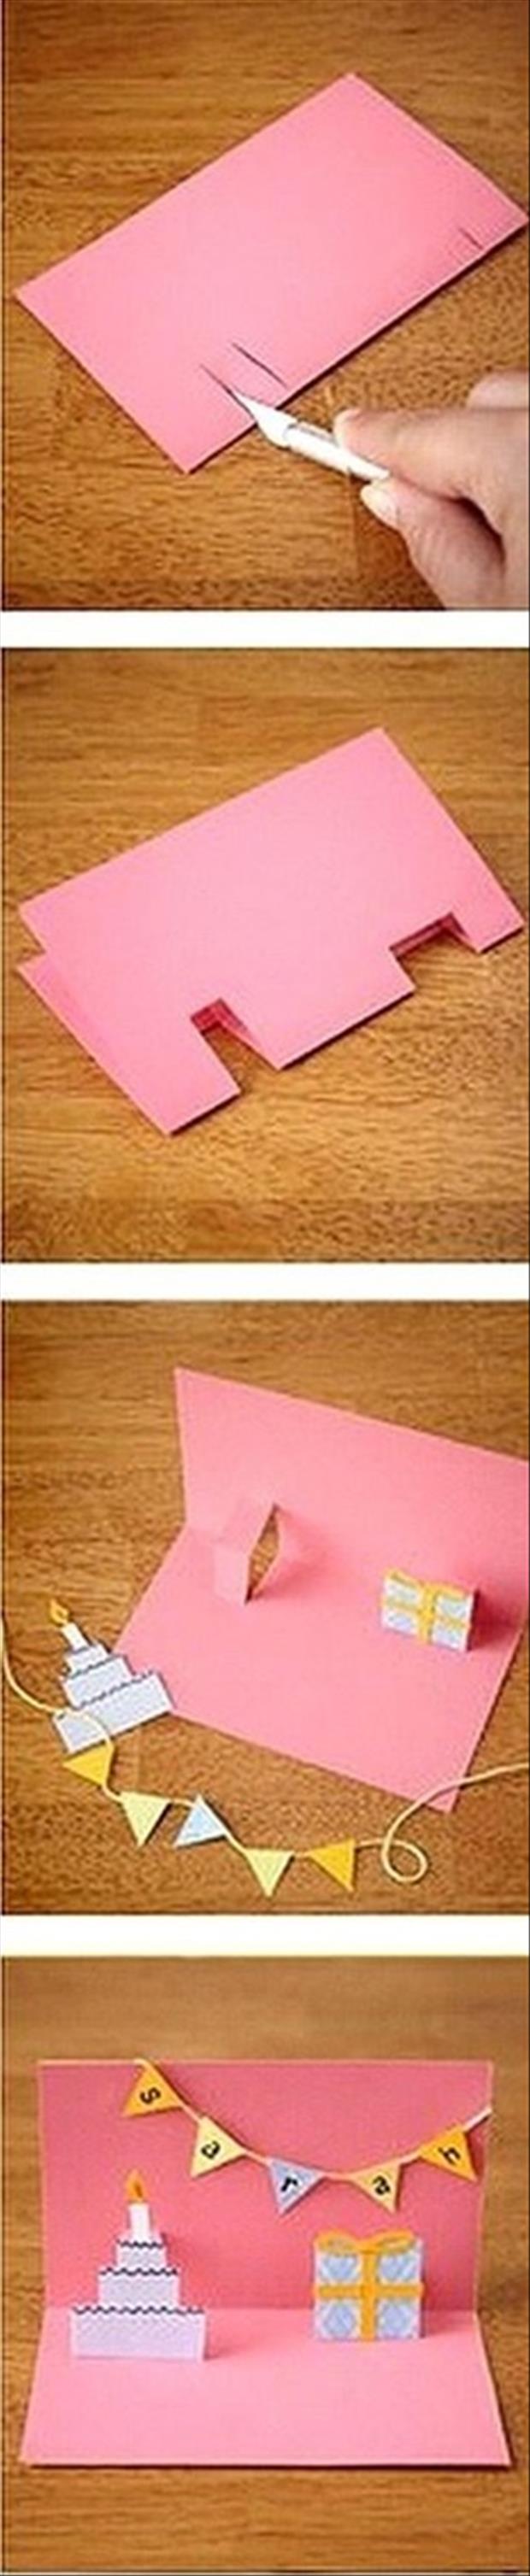 make your own birthday cards